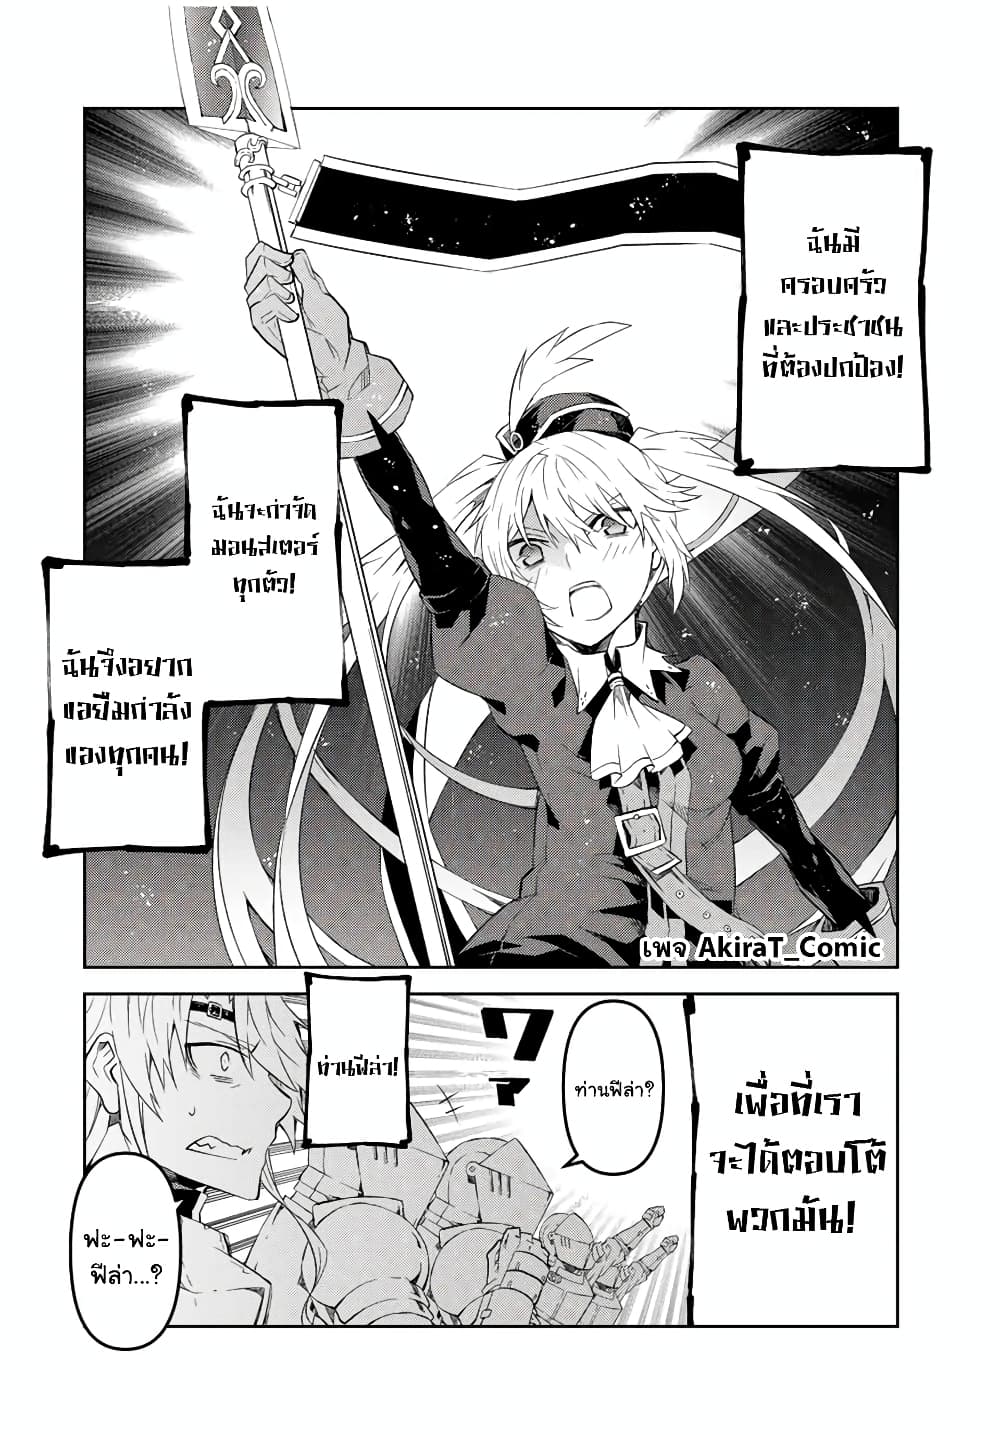 The Weakest Occupation "Blacksmith", but It's Actually the Strongest ช่างตีเหล็กอาชีพกระจอก? 55-55